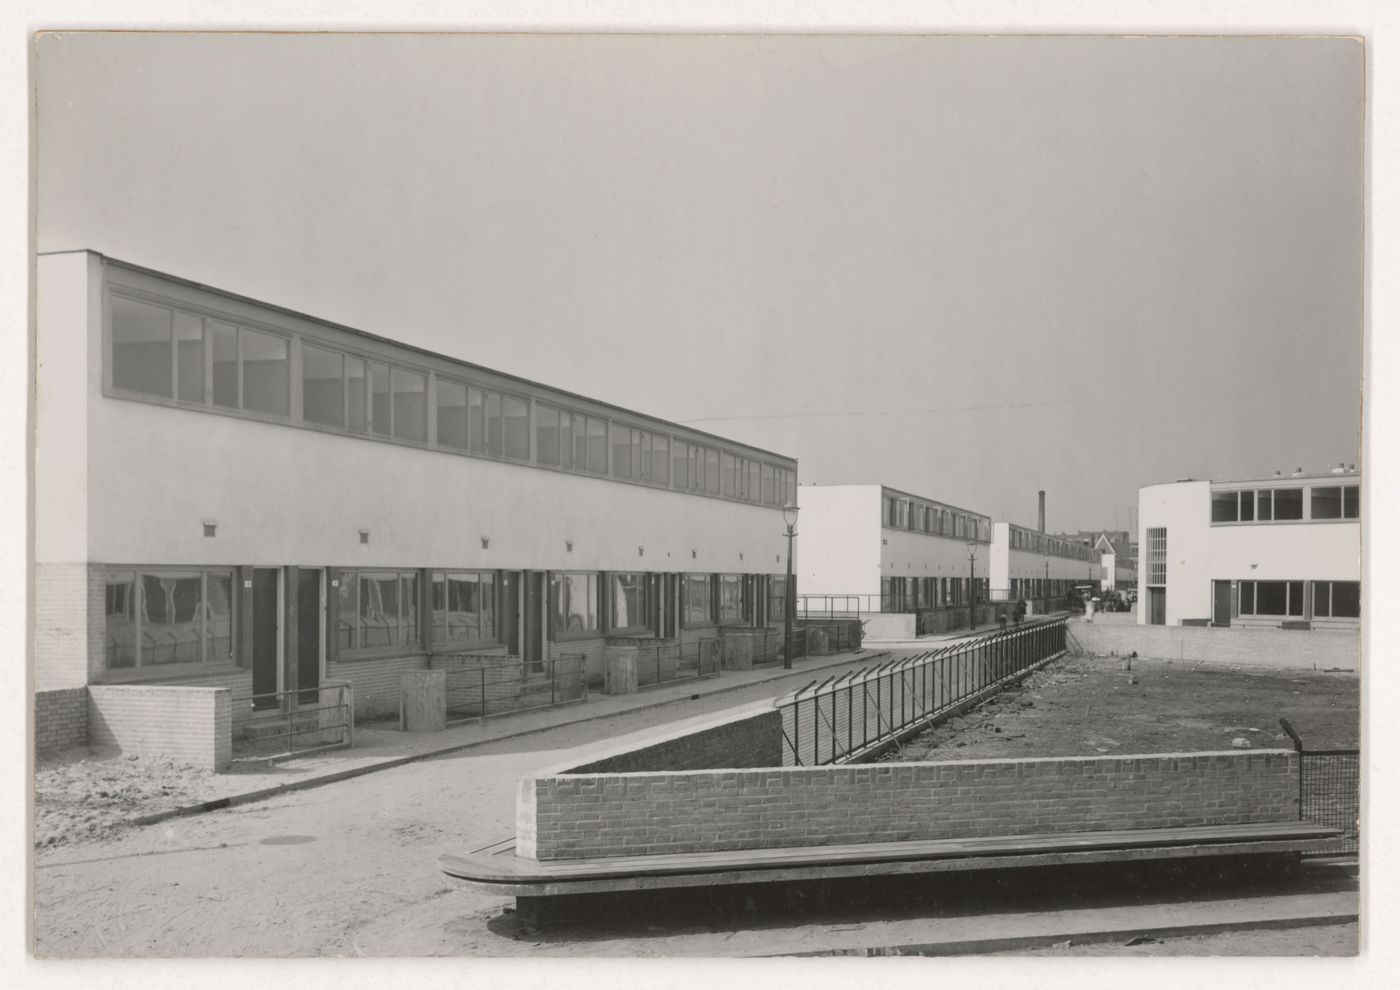 View of the principal façade of Kiefhoek Housing Estate showing a playground under construction, Rotterdam, Netherlands